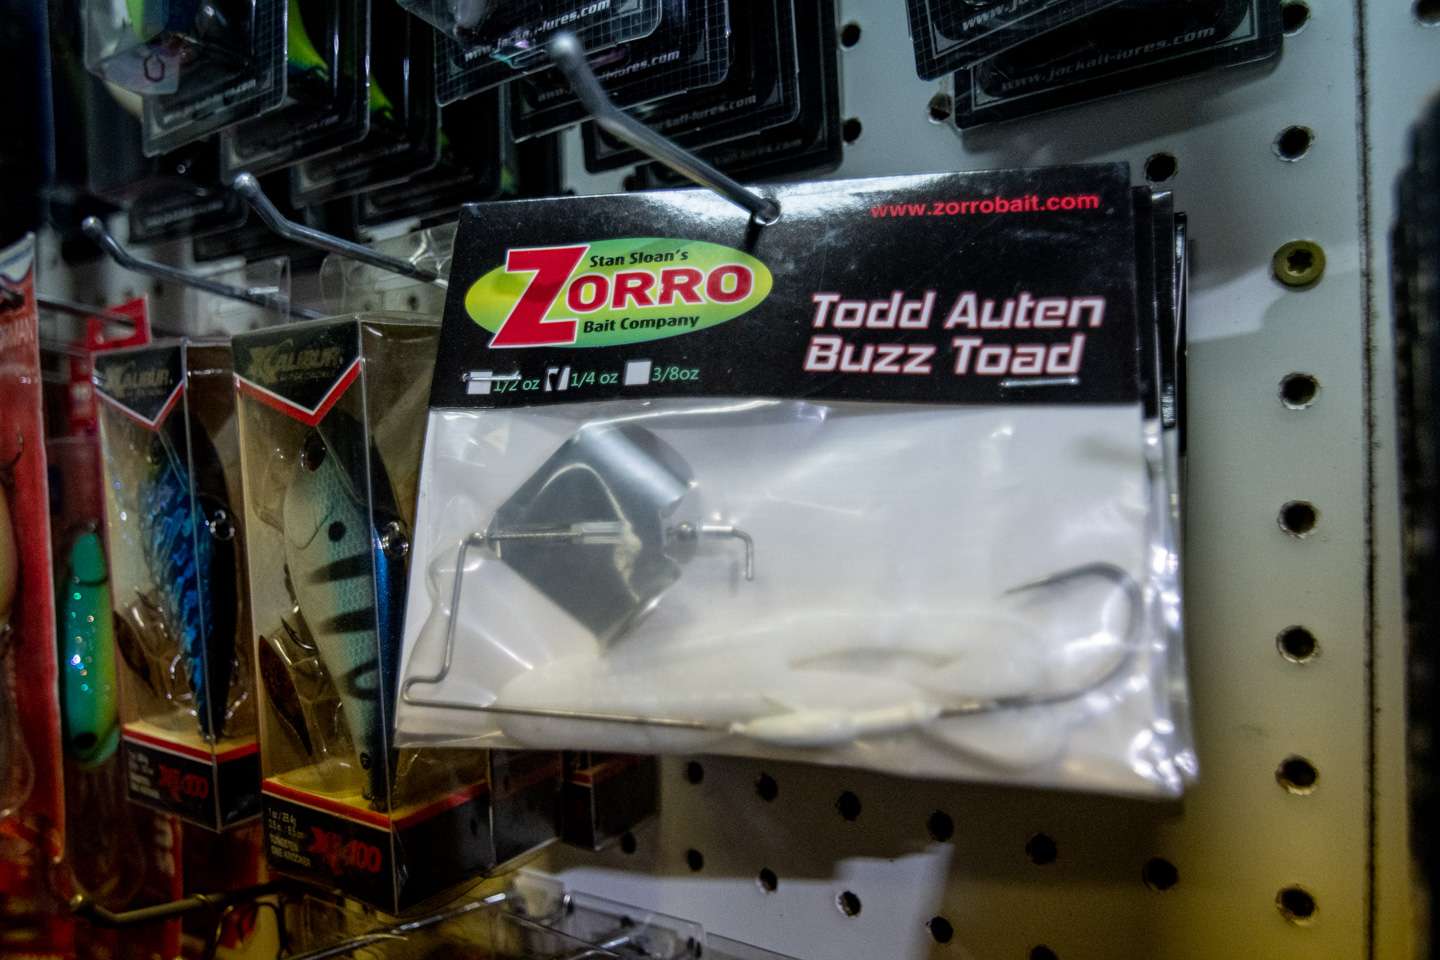 Auten’s signature buzz toad, from his past sponsorship with Zorro, is one of the many items hanging along his pegboard wall. 